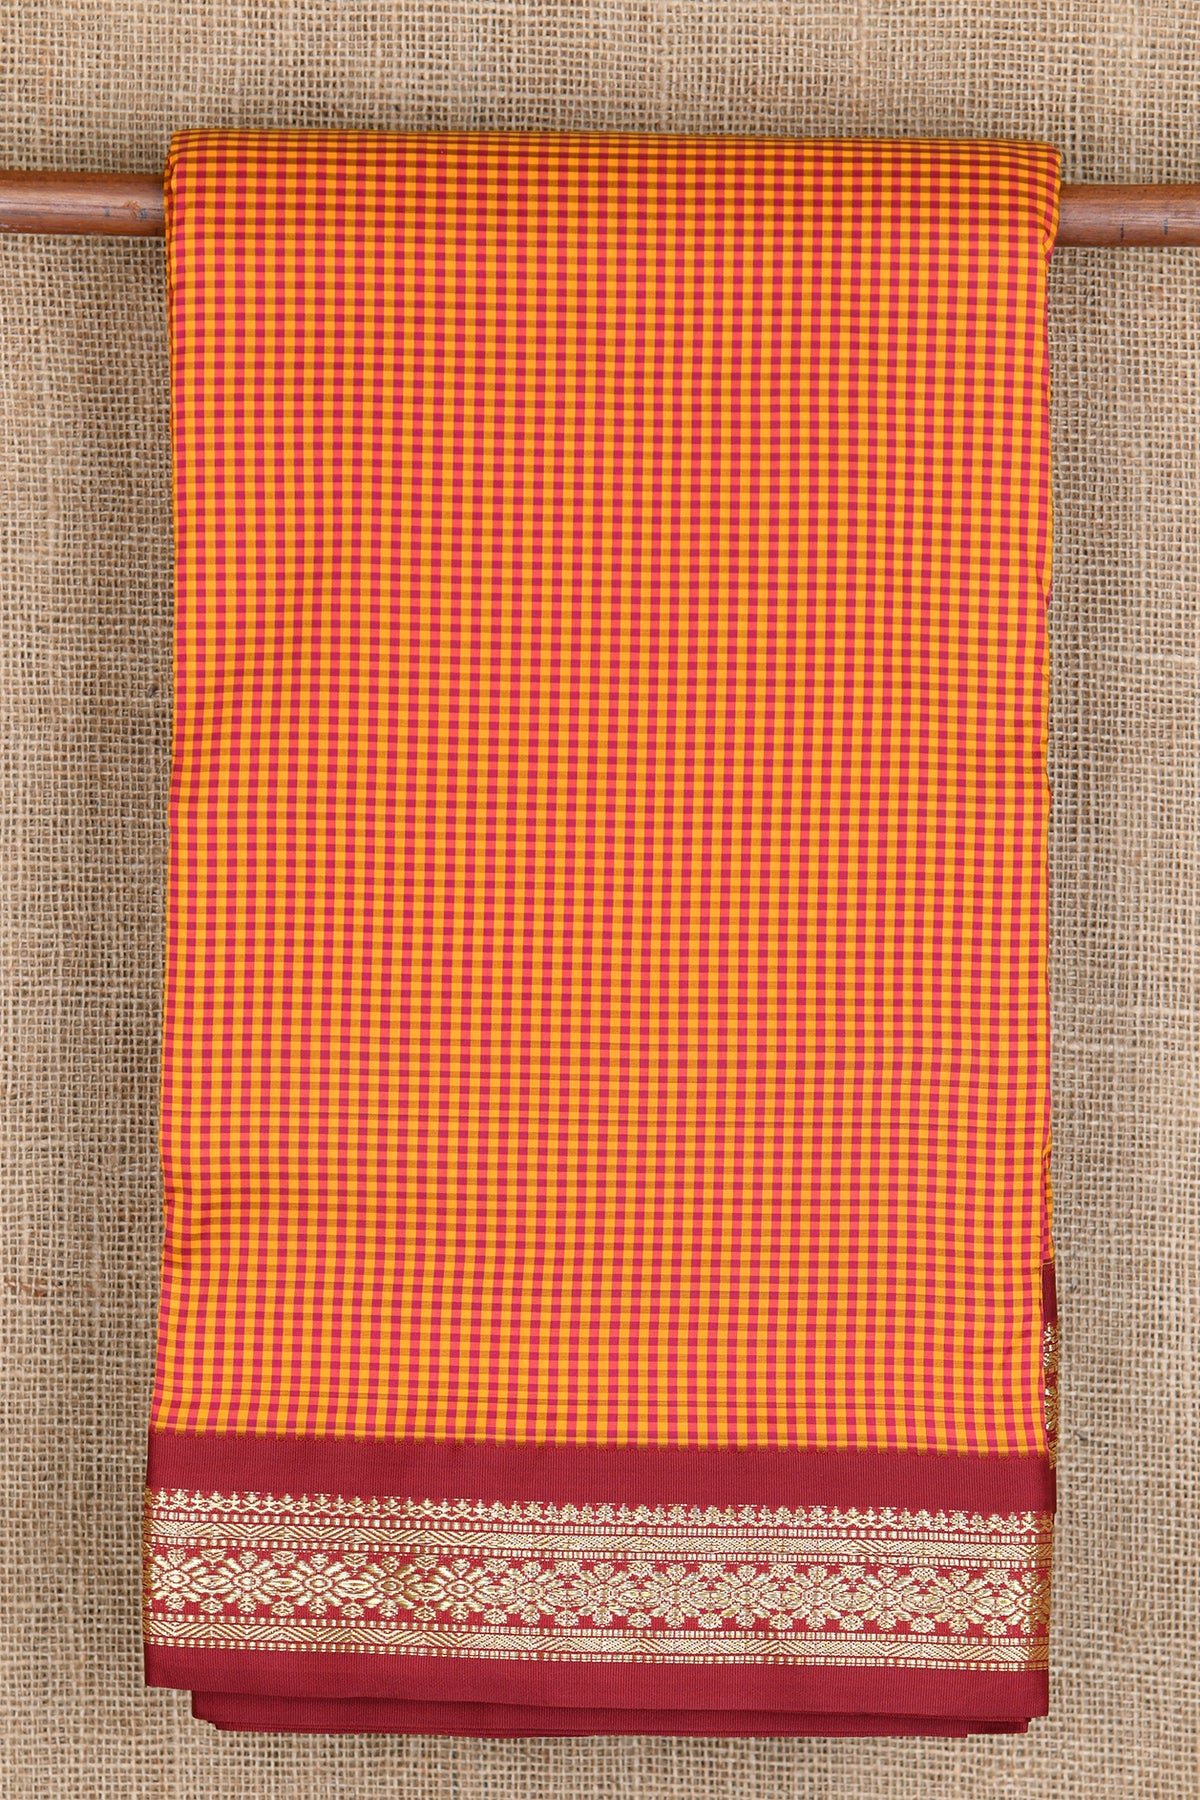 Contrast Floral Border With Small Checks Mustard And Maroon Nine Yards Art Silk Saree